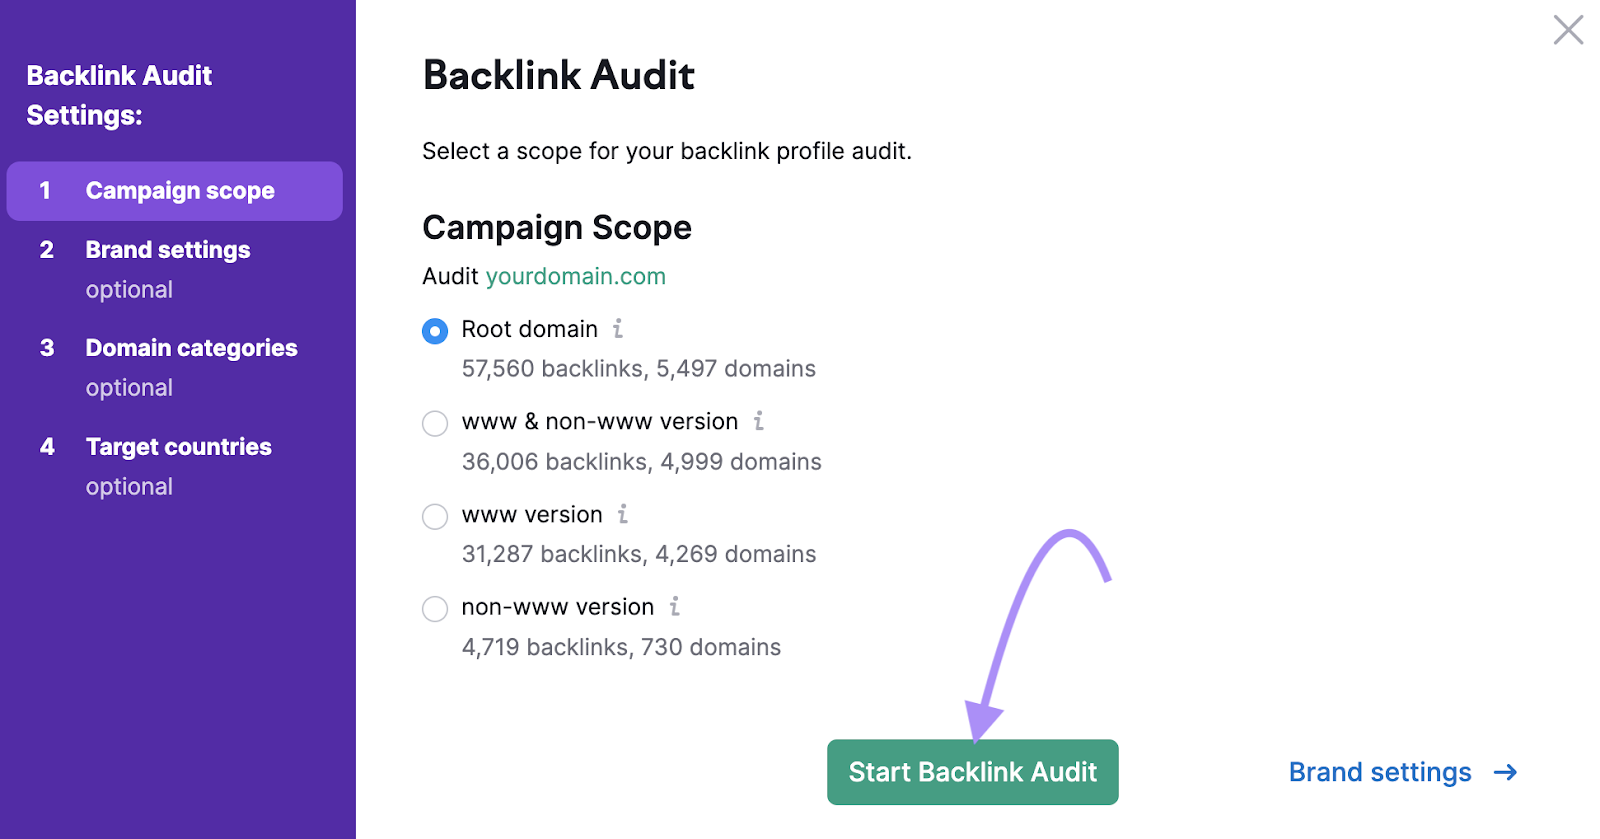 "Campaign Score" section of Backlink Audit Settings